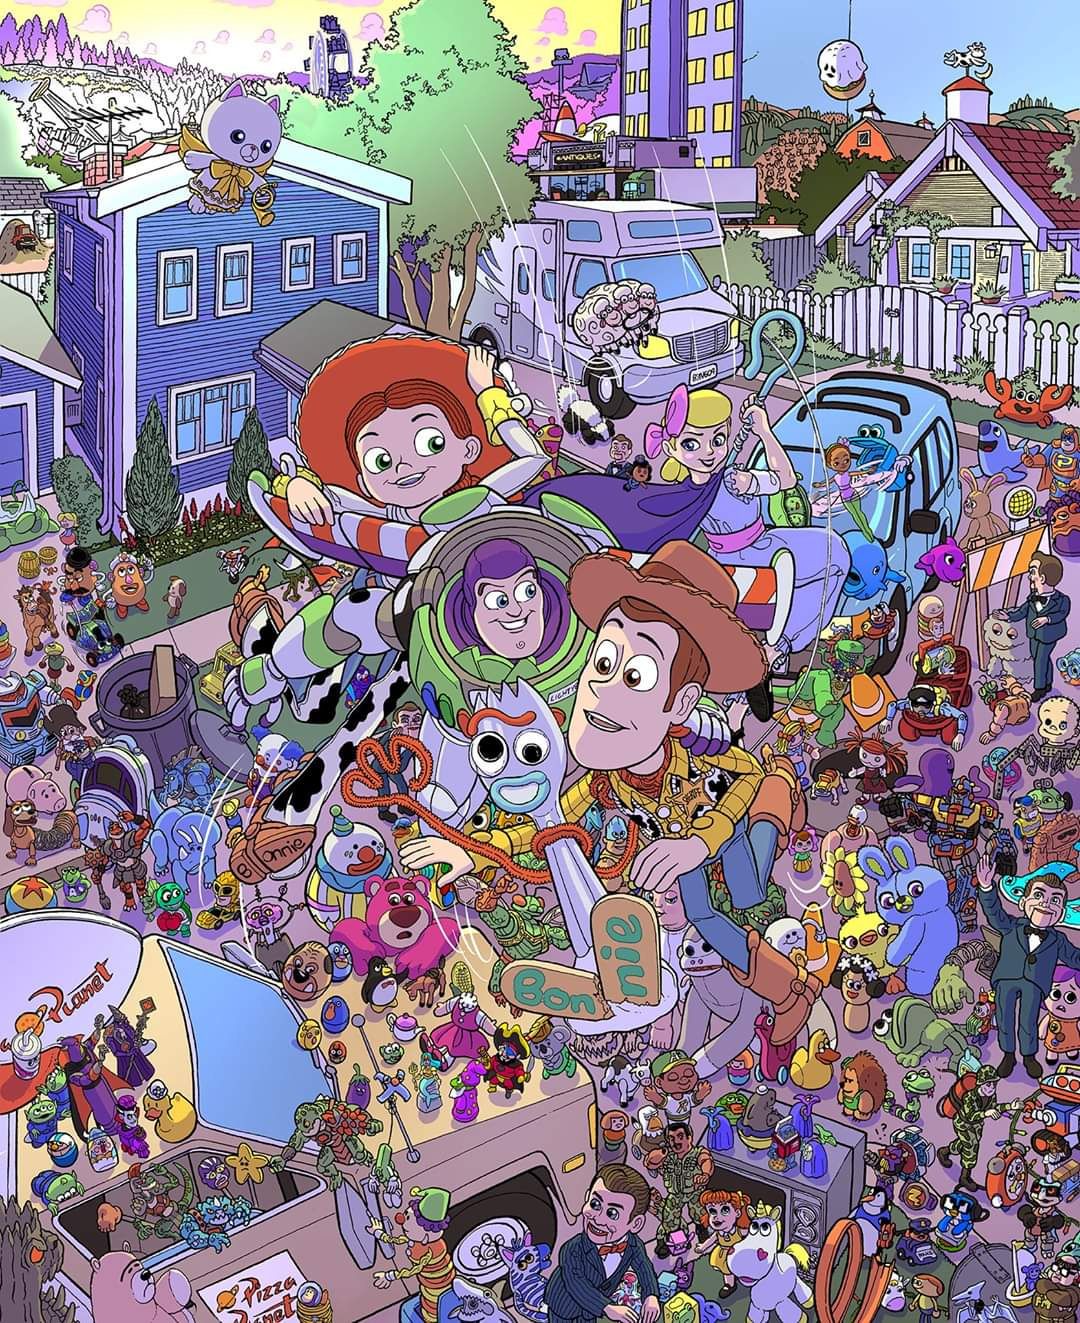 toy story wallpaper